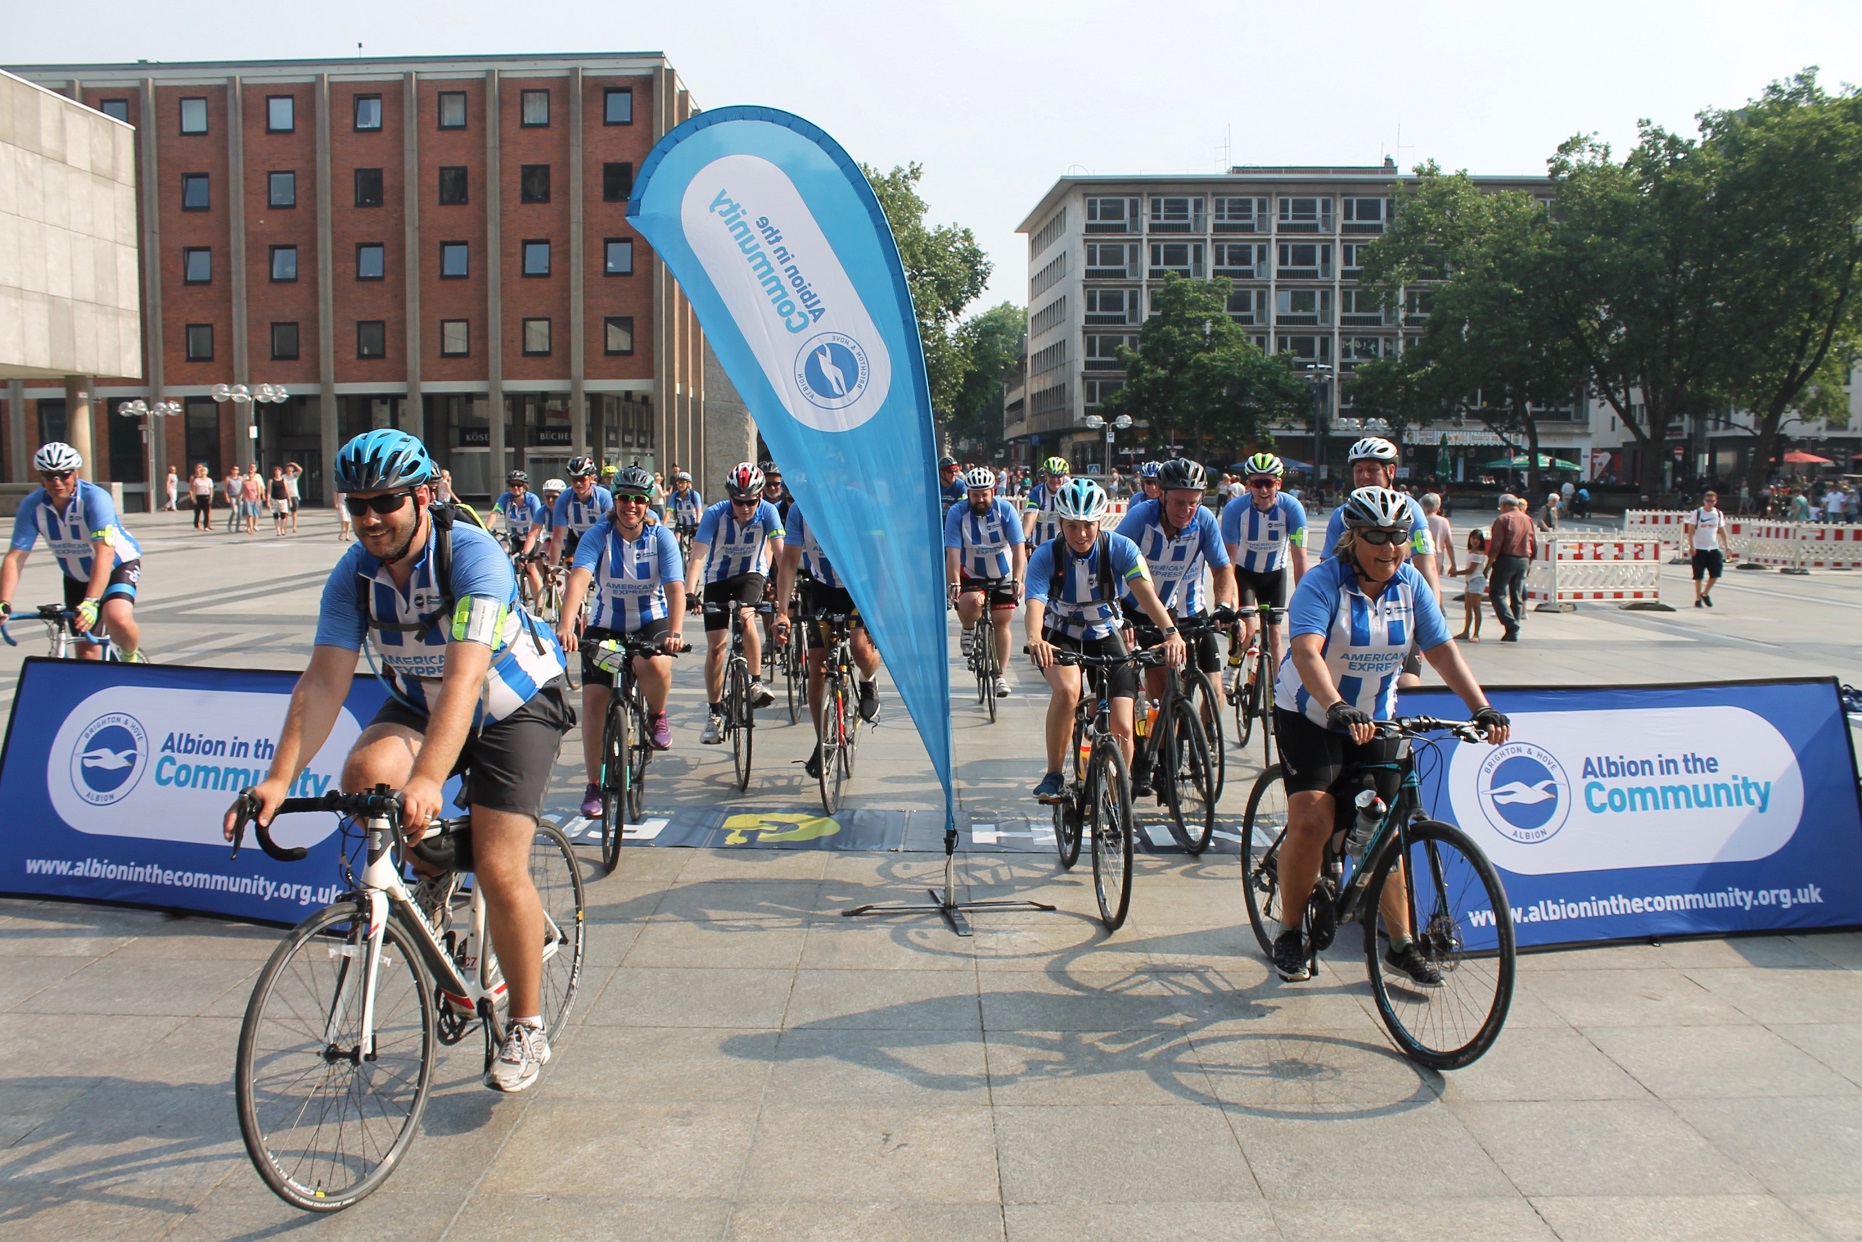 Brussels to Cologne bike ride raises £35,000 for Albion in the Community